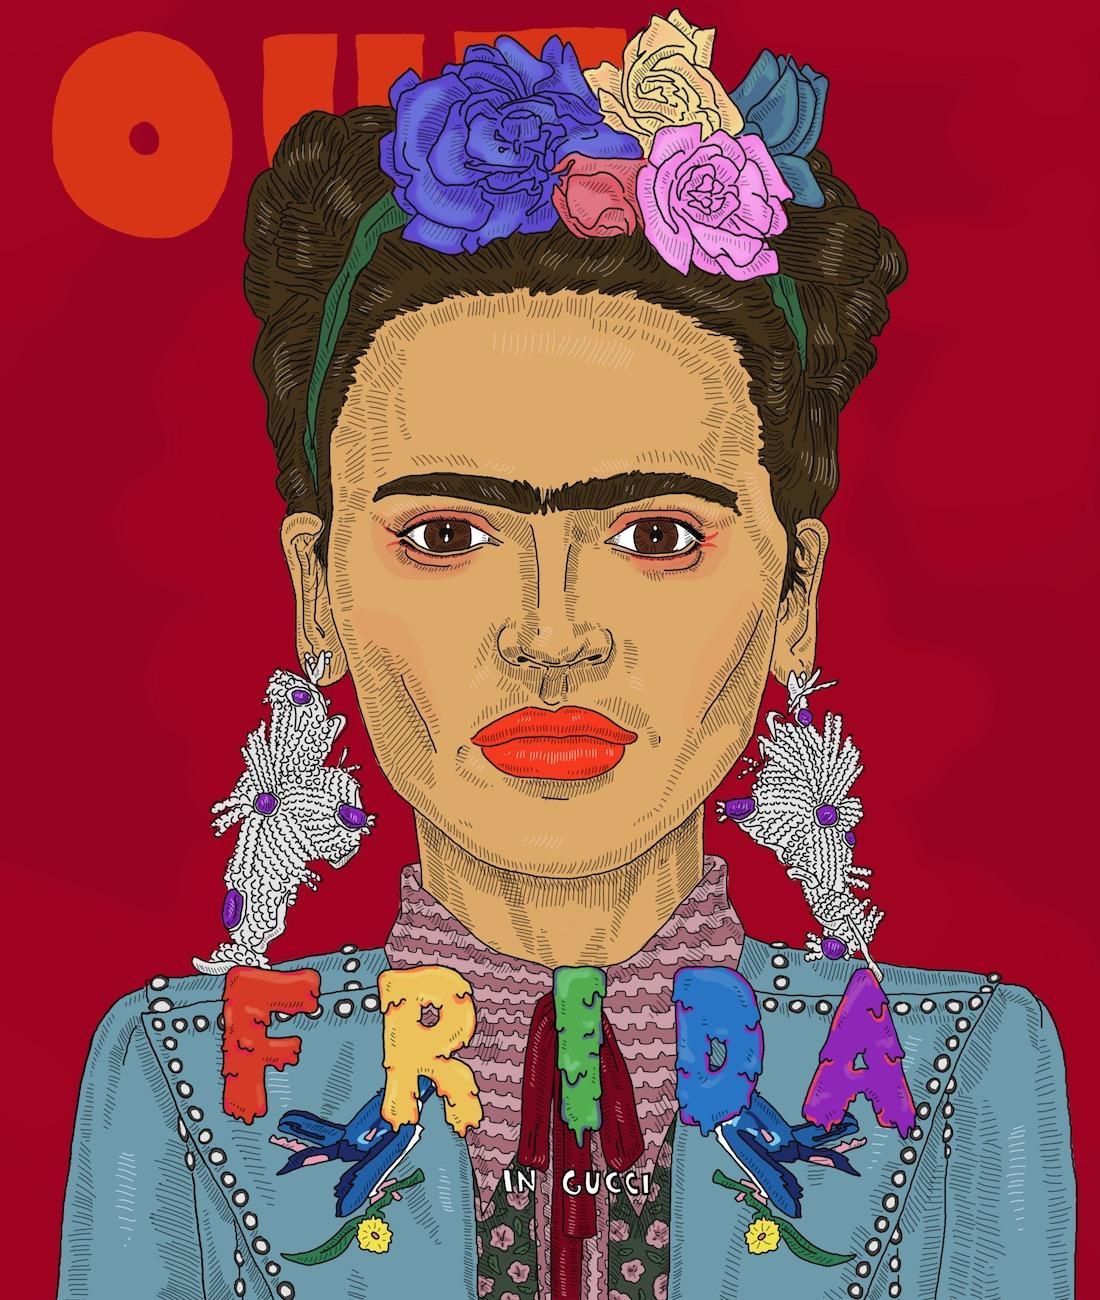 Fantasy OUT Covers: Frida Kahlo in Gucci